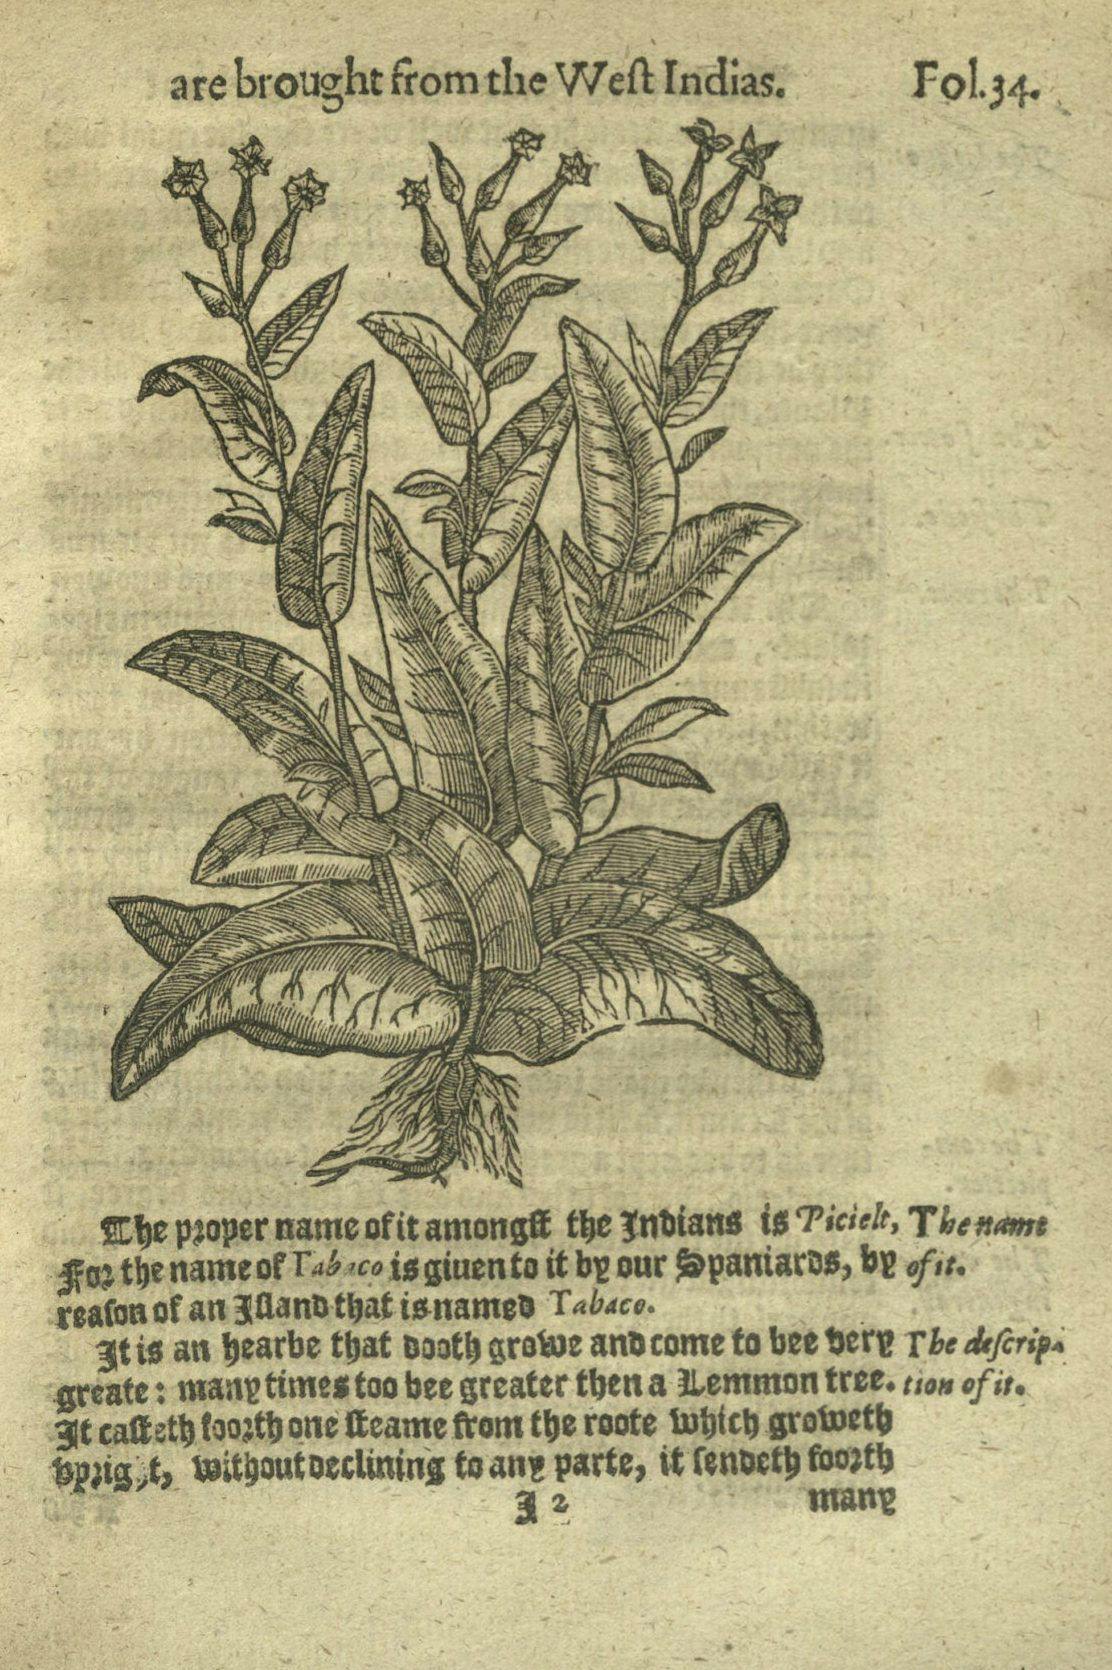 Fun Fact: What Disease Did a Physician in the 16th Century Believe Tobacco Could Cure?